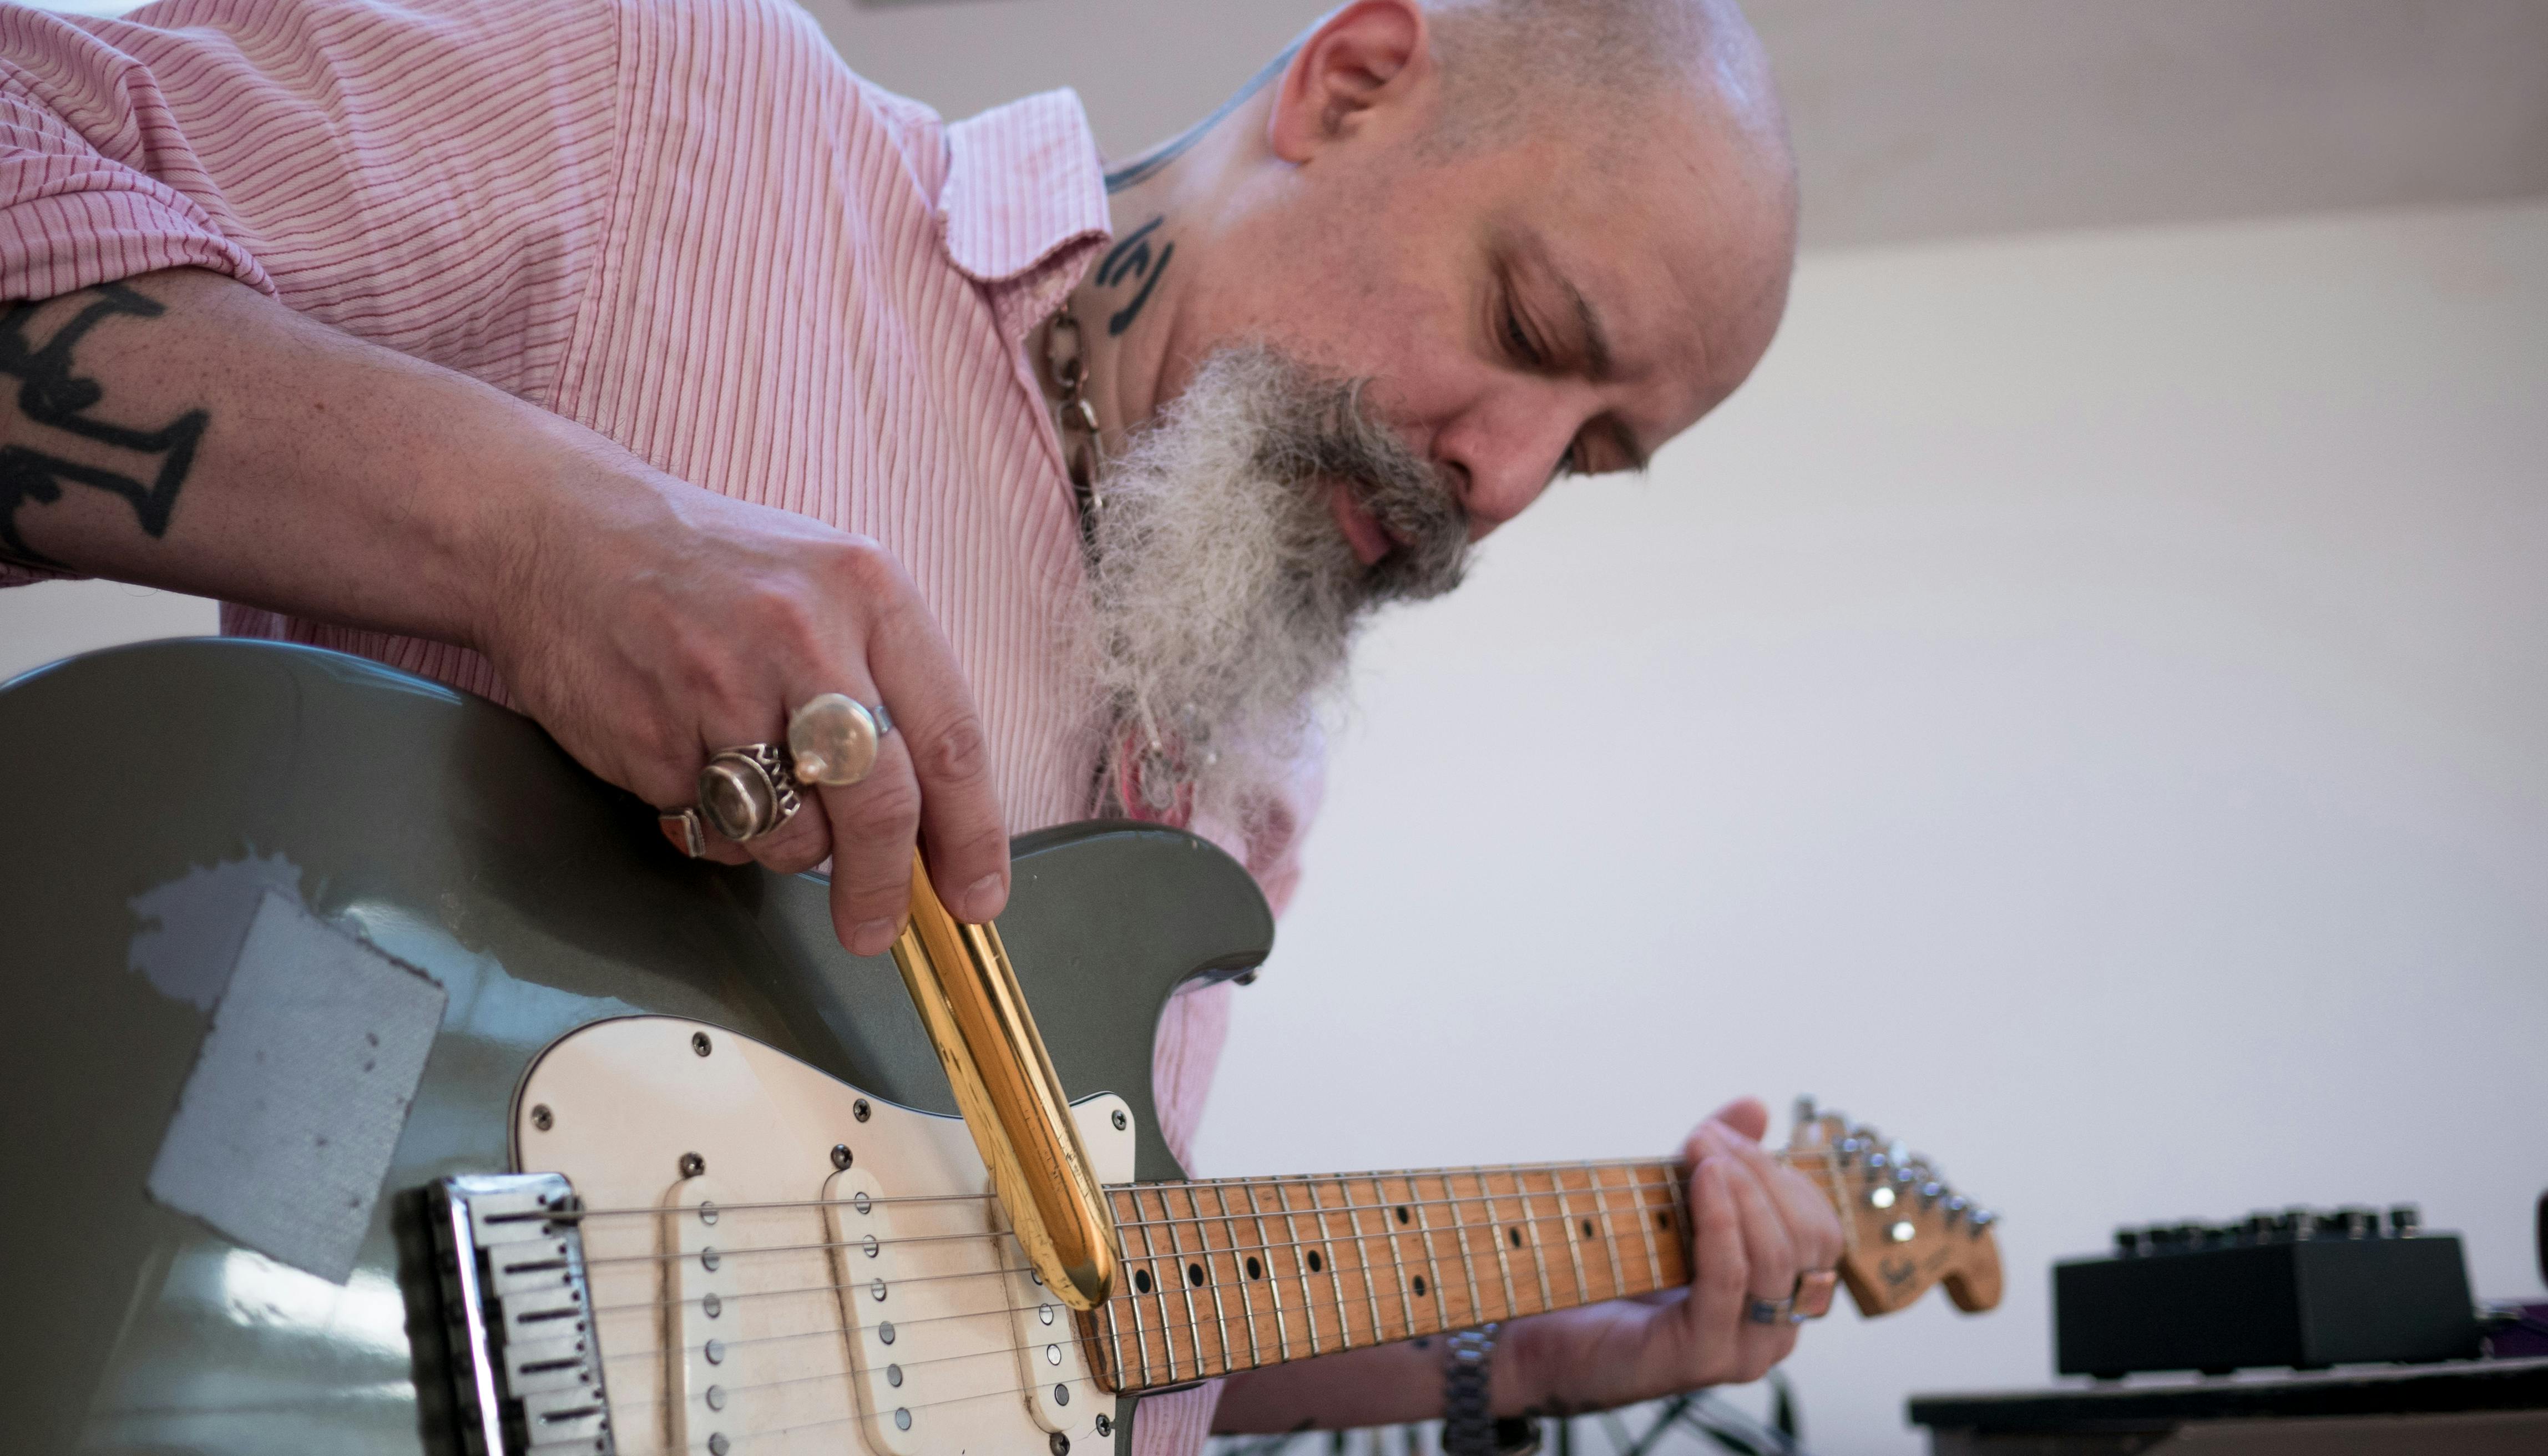 Musician Fabrizio Modonese Palumbo as he plays electric guitar. His concentrated face is framed by a long white beard; he wears a pink striped shirt and numerous rings. Tattoos can be glimpsed on his arms and neck.